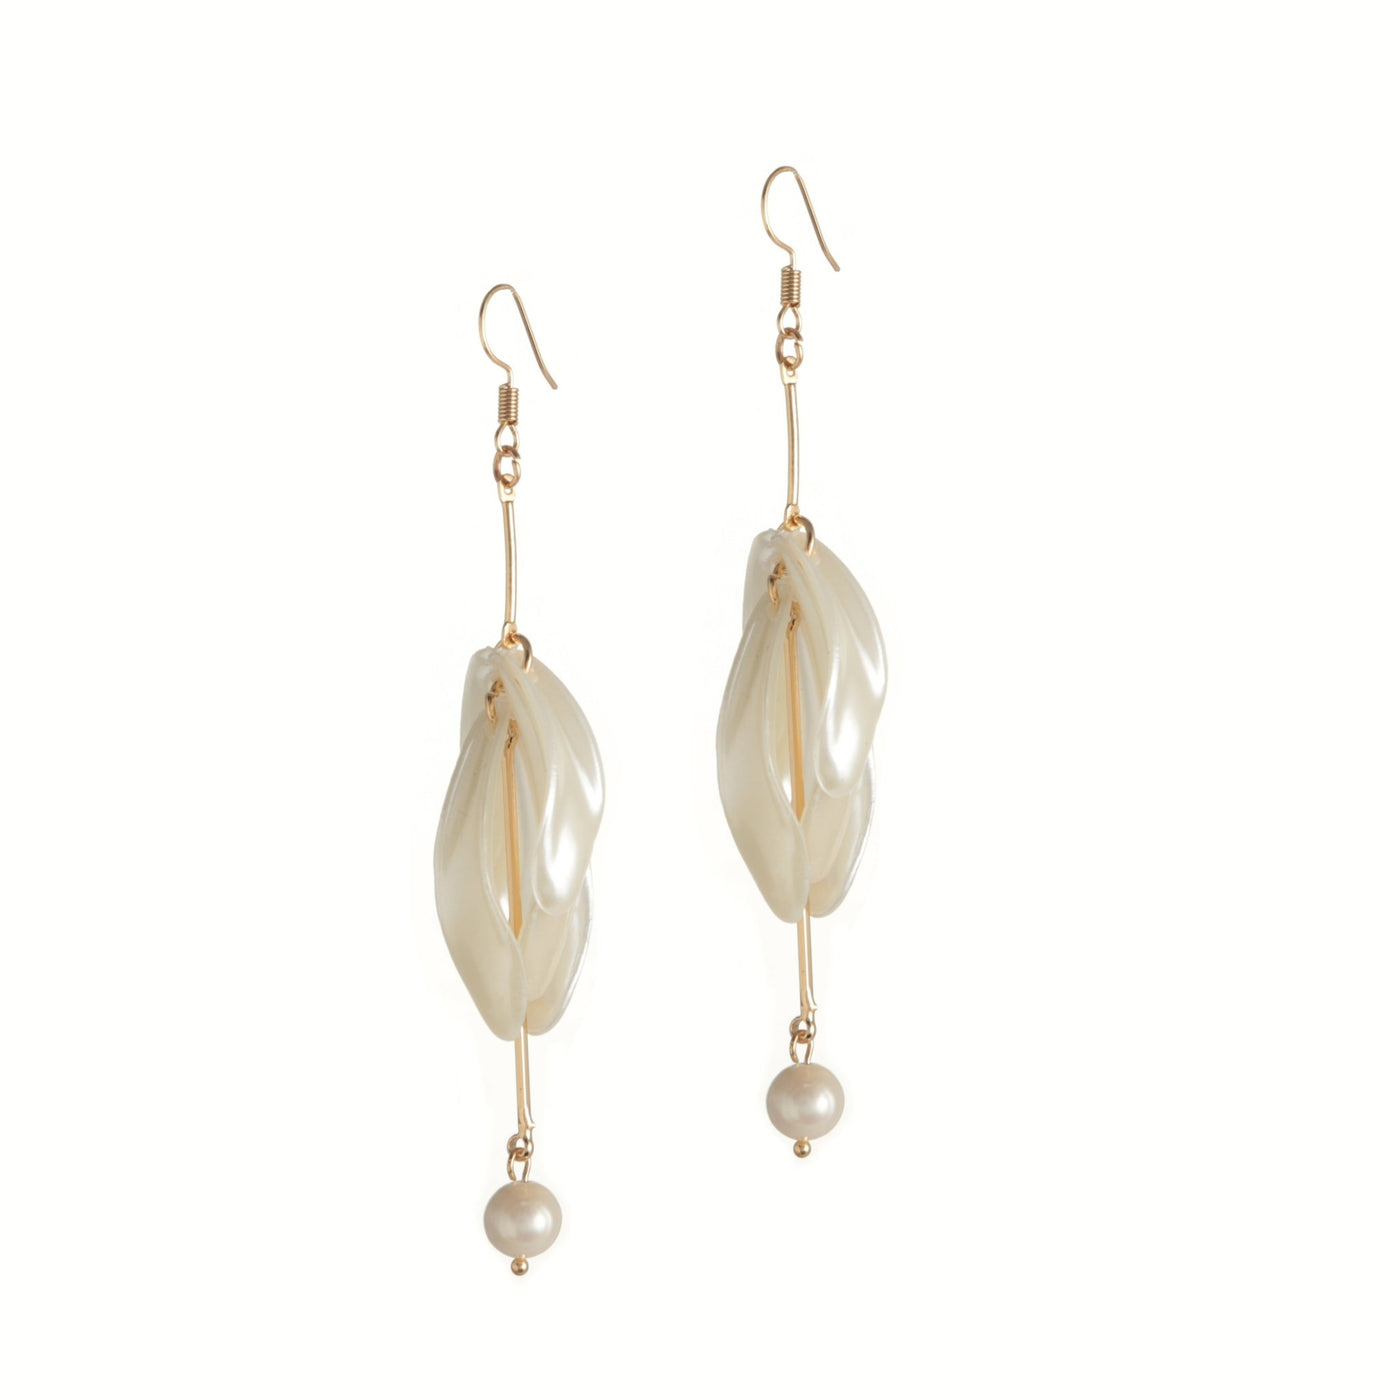 Gala elegant drop earrings with synthetic pearl highlights - Hey Sara